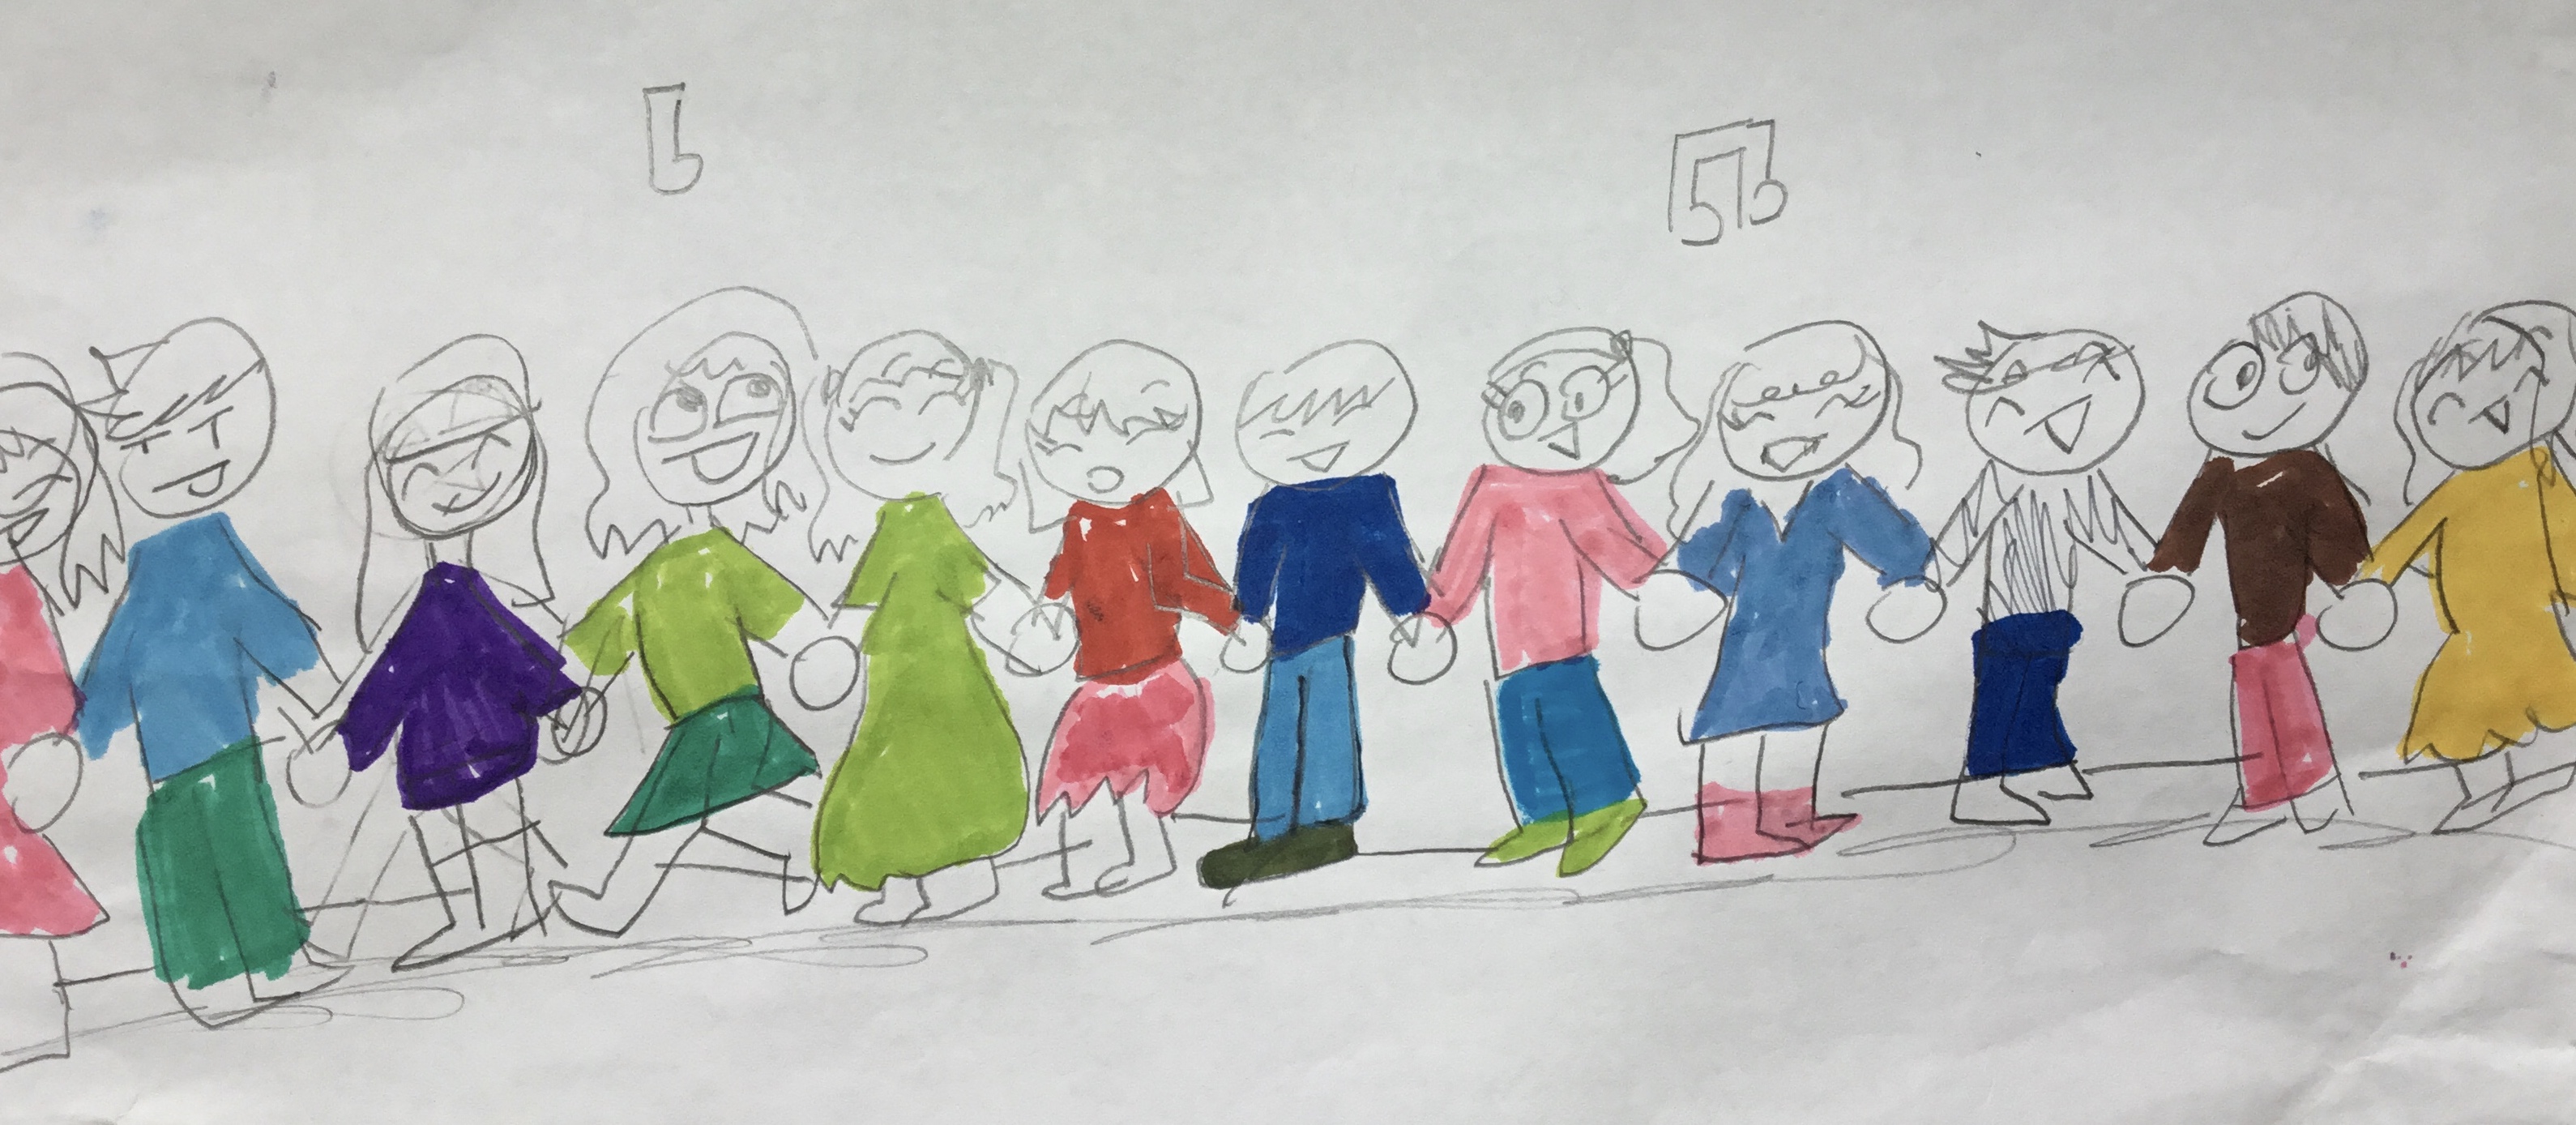 Dancers Joining Hands (from a student's thank you note)